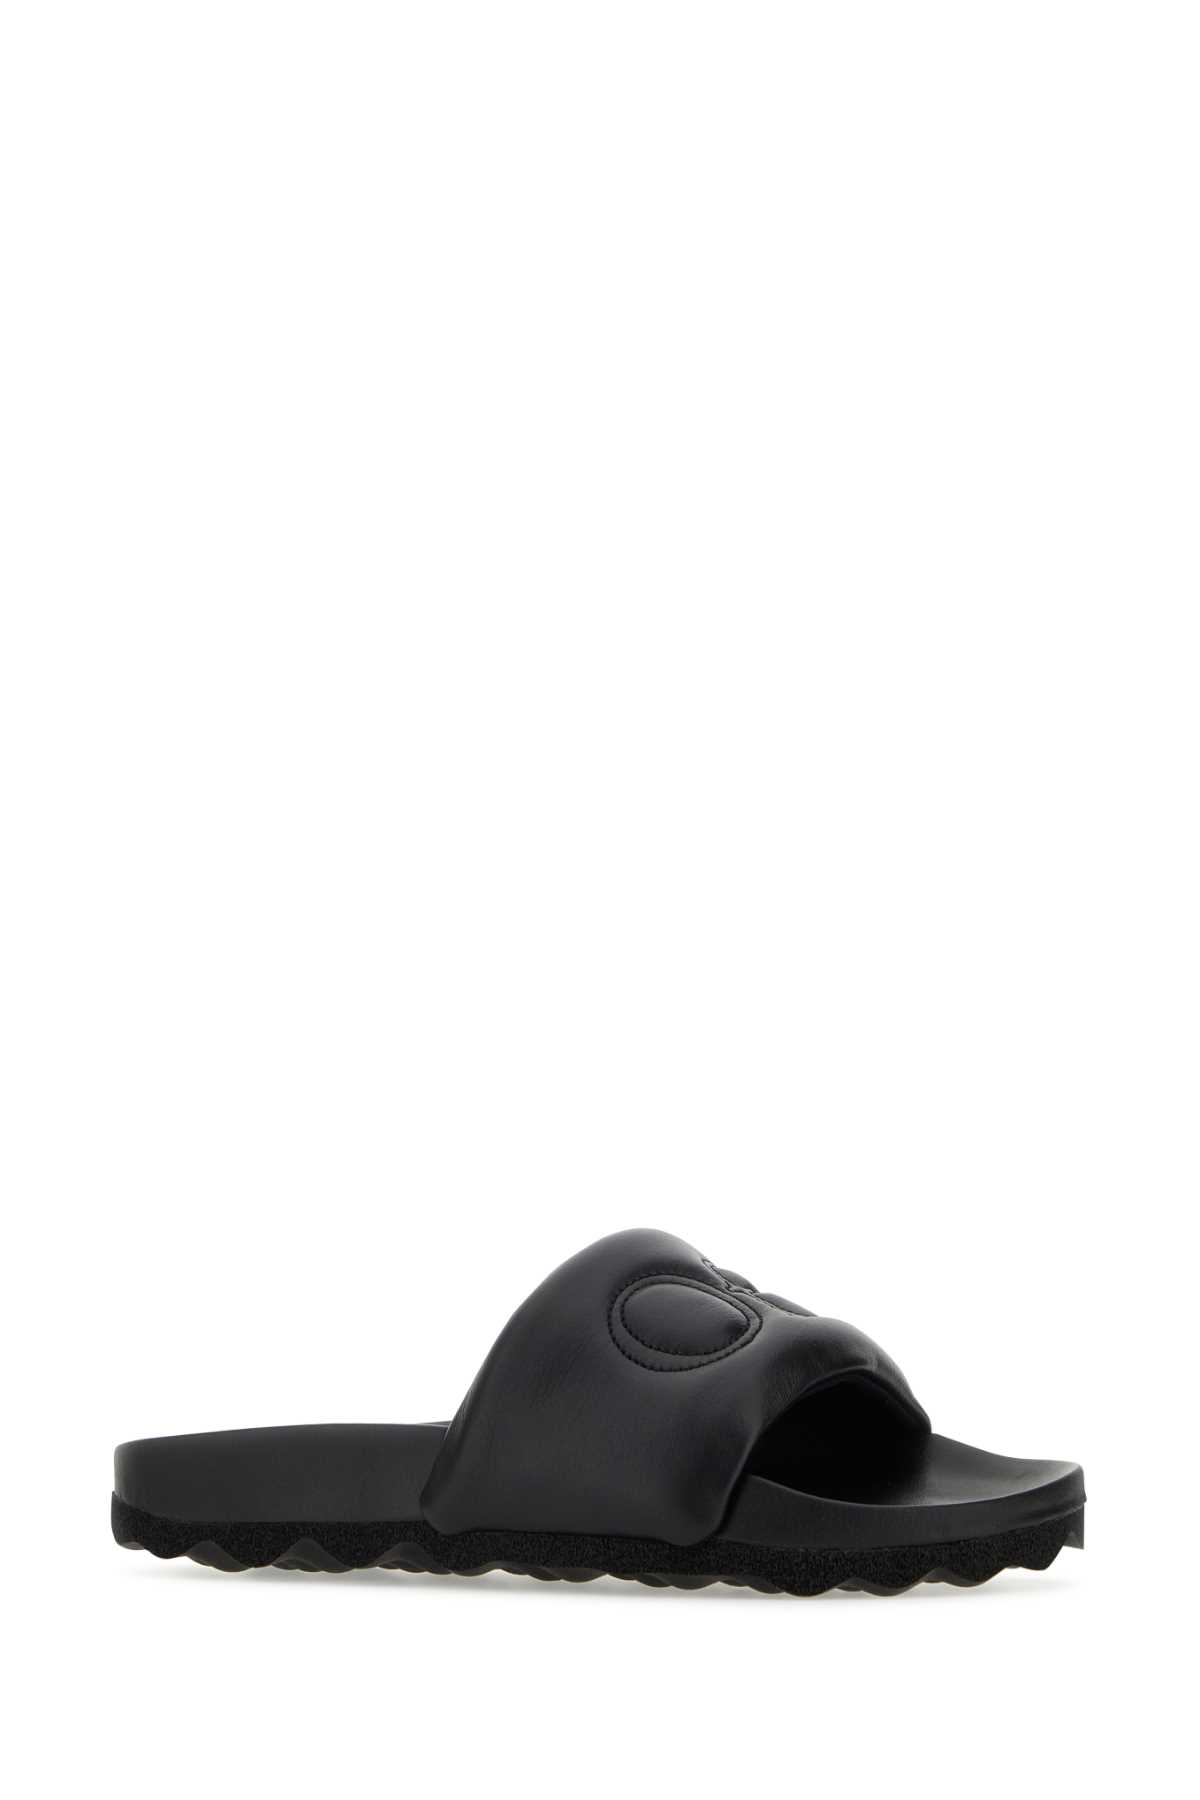 OFF-WHITE BLACK LEATHER BOOKISH SLIPPERS